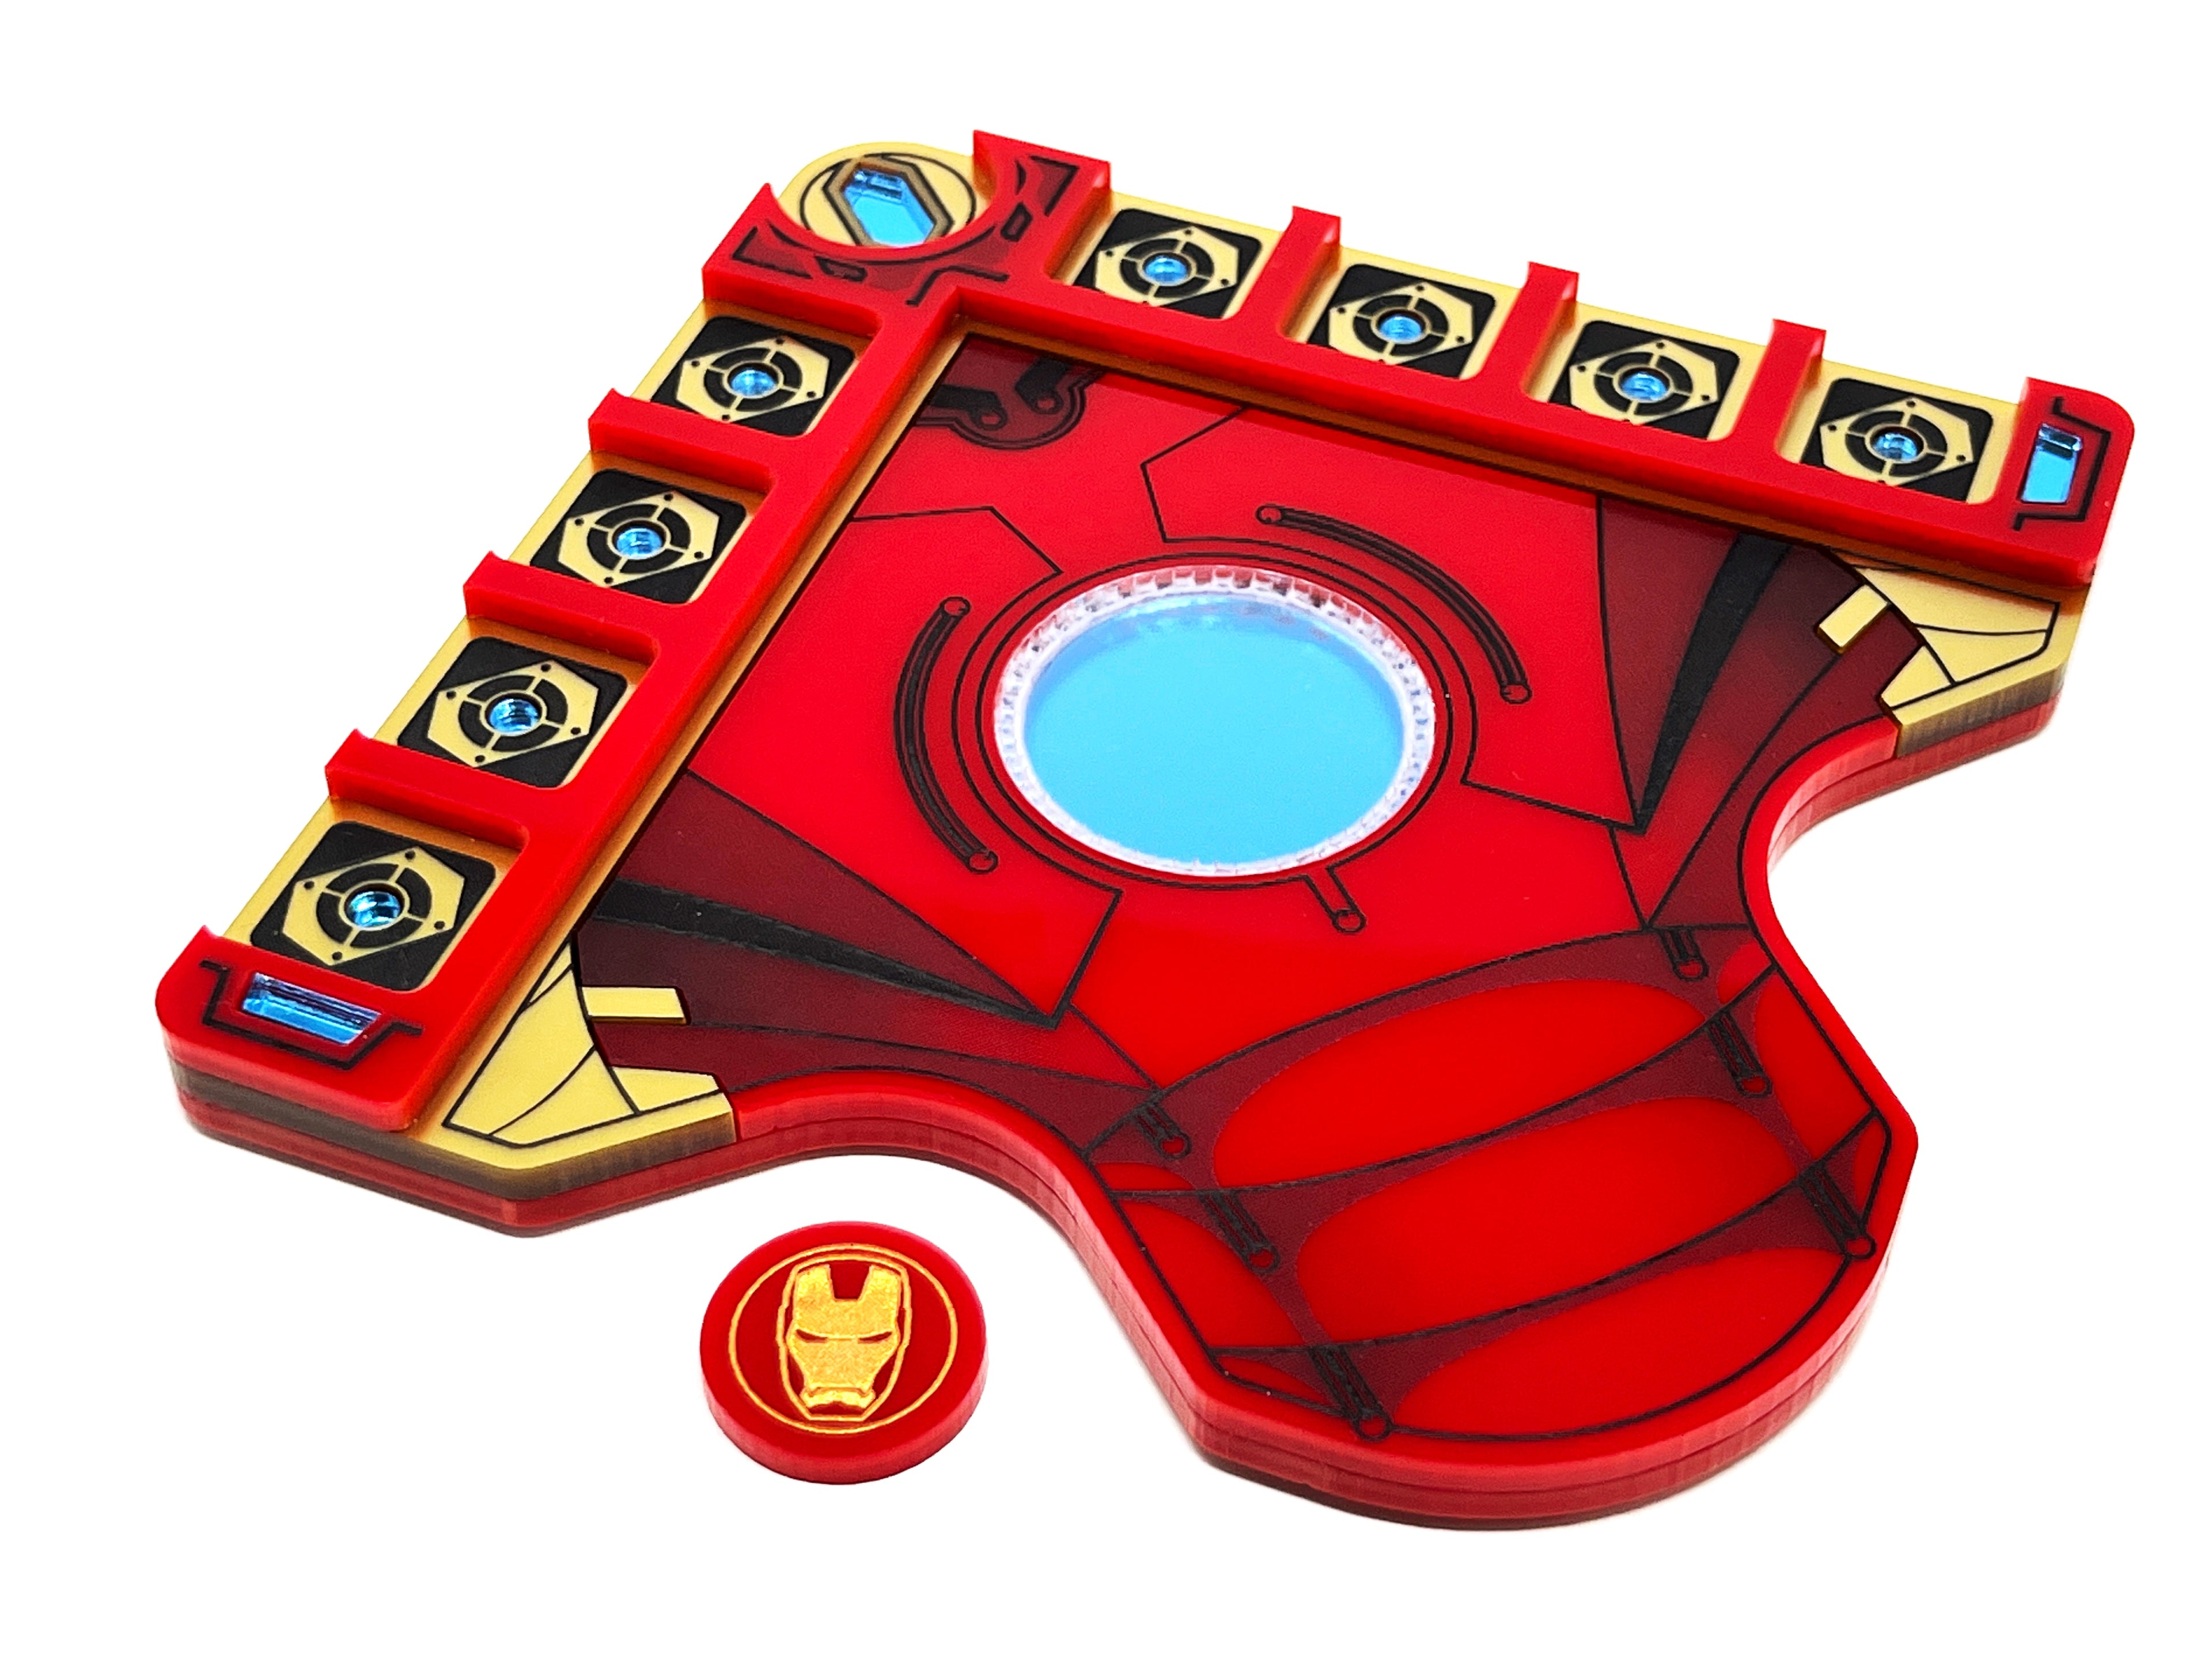 Iron Man Themed Hero board for Marvel Champions LCG compatible, (Tokens NOT Included)